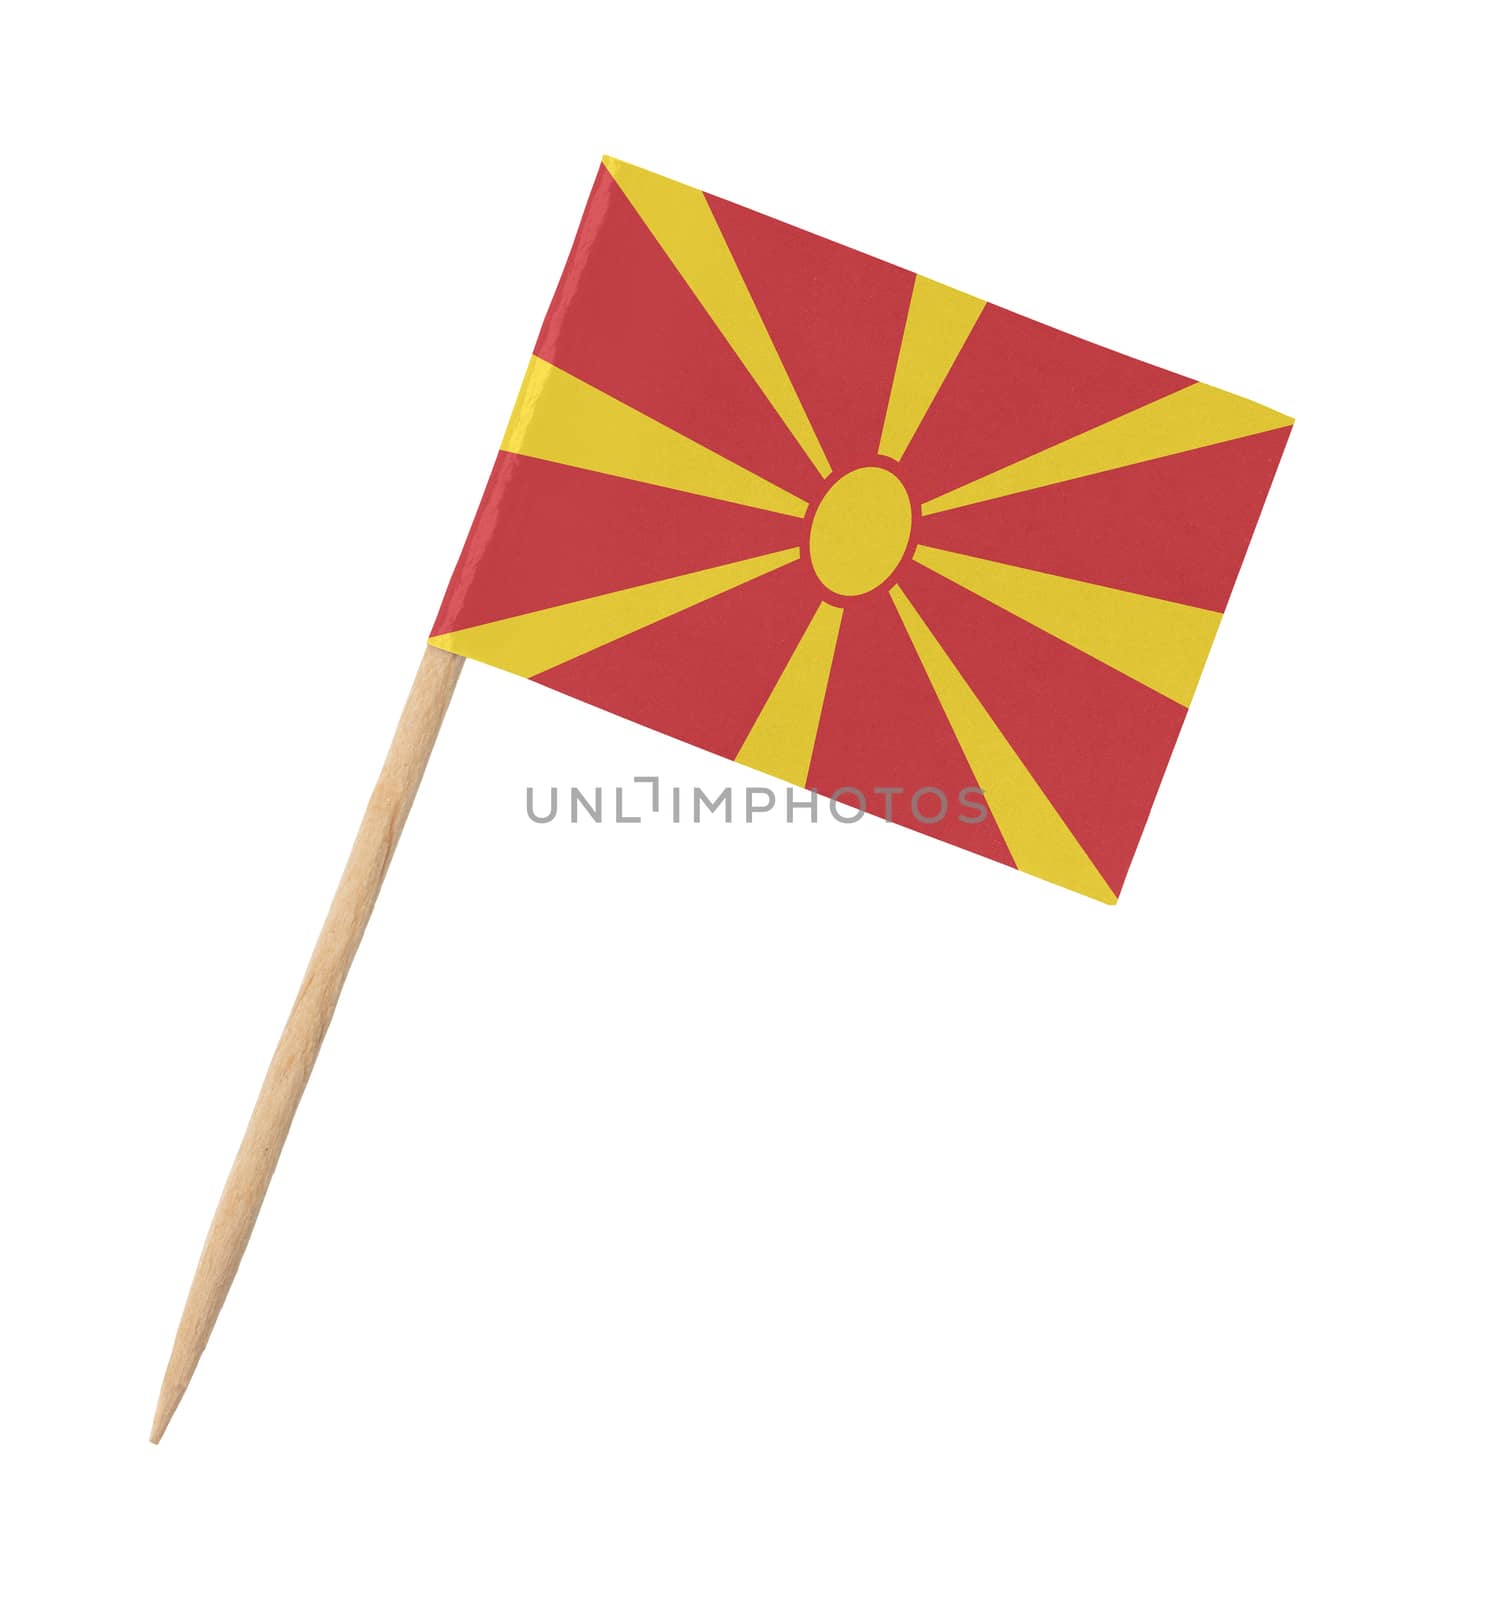 Small paper flag of Macedonia on wooden stick, isolated on white